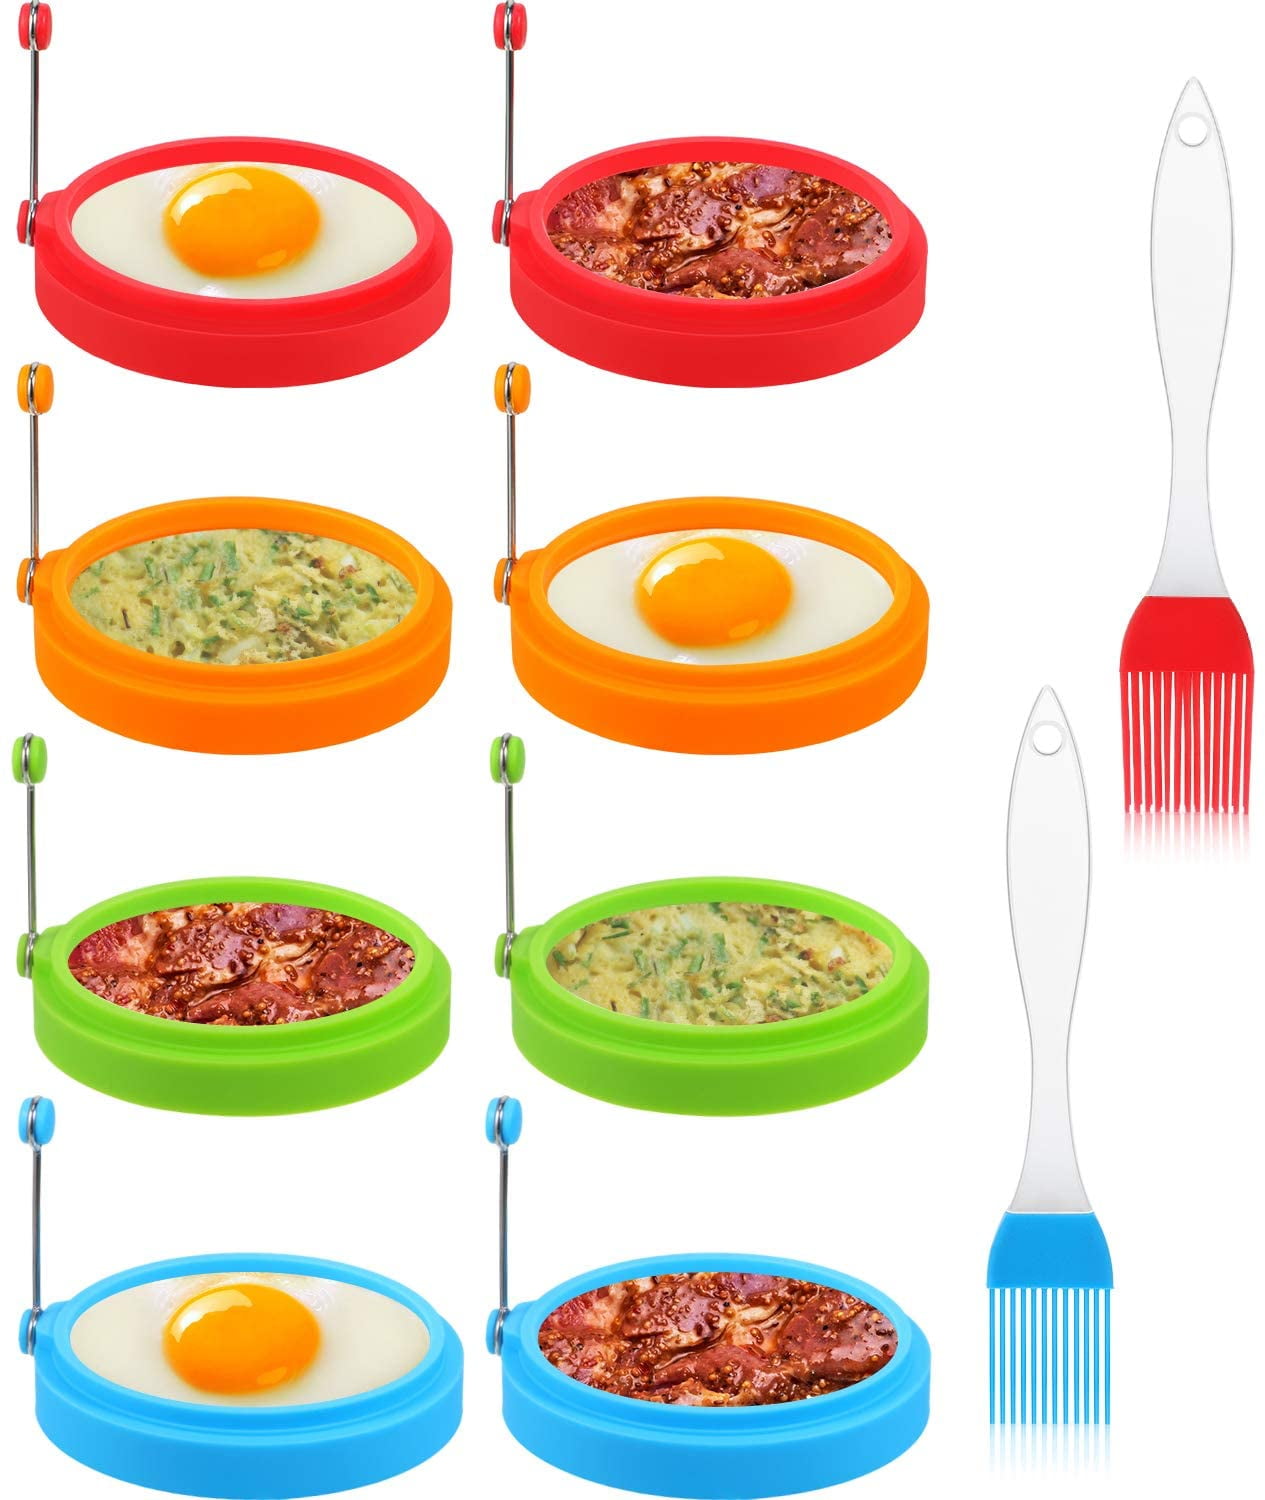 4 Pieces 4 Inches Stainless Steel Egg Rings 6 Inches Nonstick Egg Ring Molds 8 Inches Pancake Rings Round Egg Cooker Rings with Orange Silicone Handles for Breakfast Pancake Omelette Sandwich 